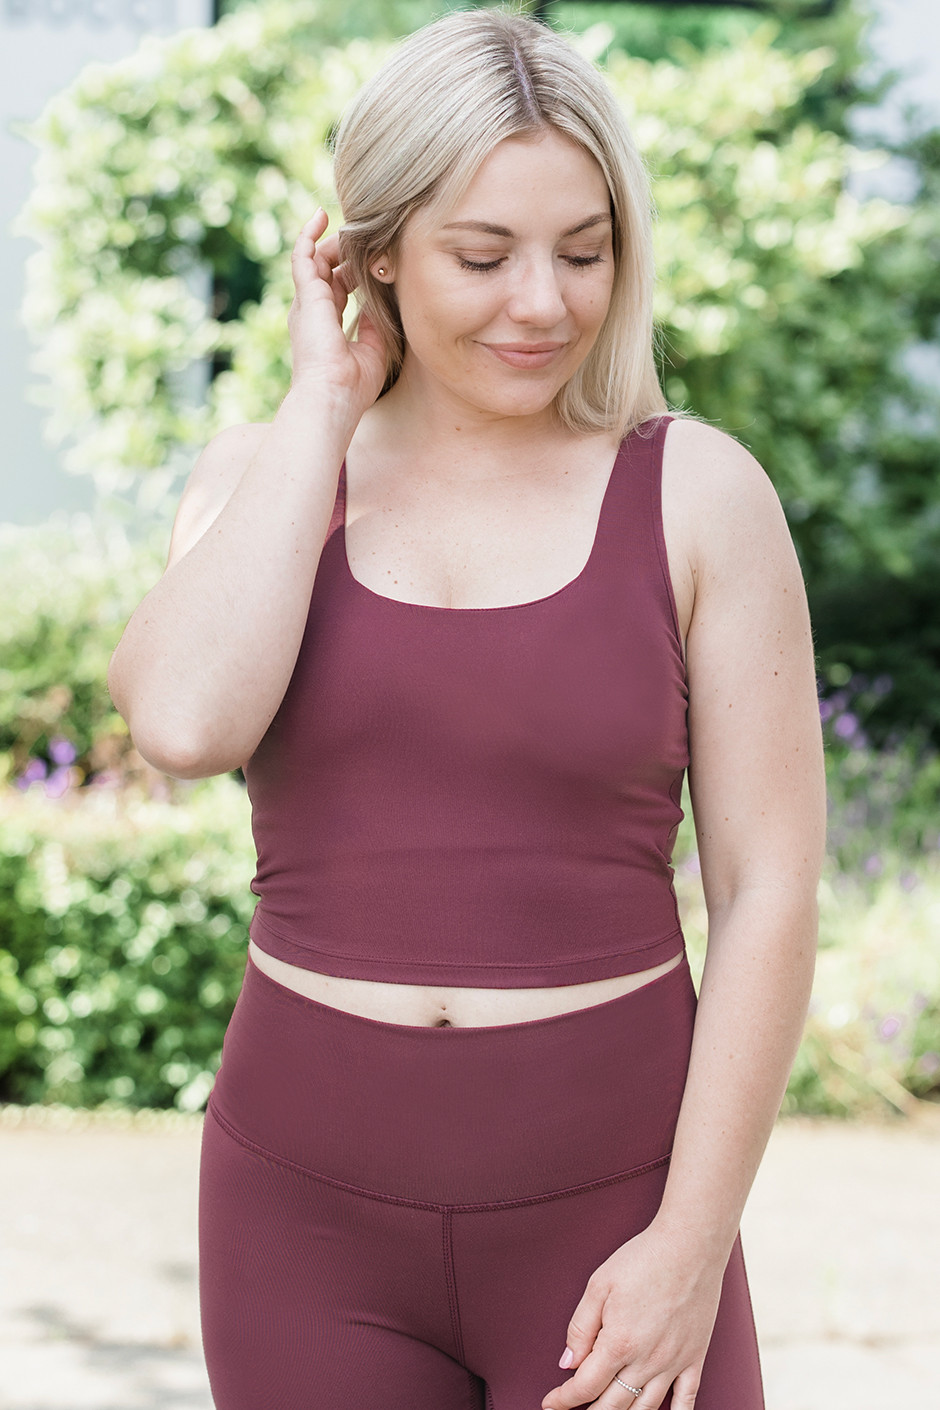 lululemon - Open back with a twist. This 2-in-1 tank and bra combo